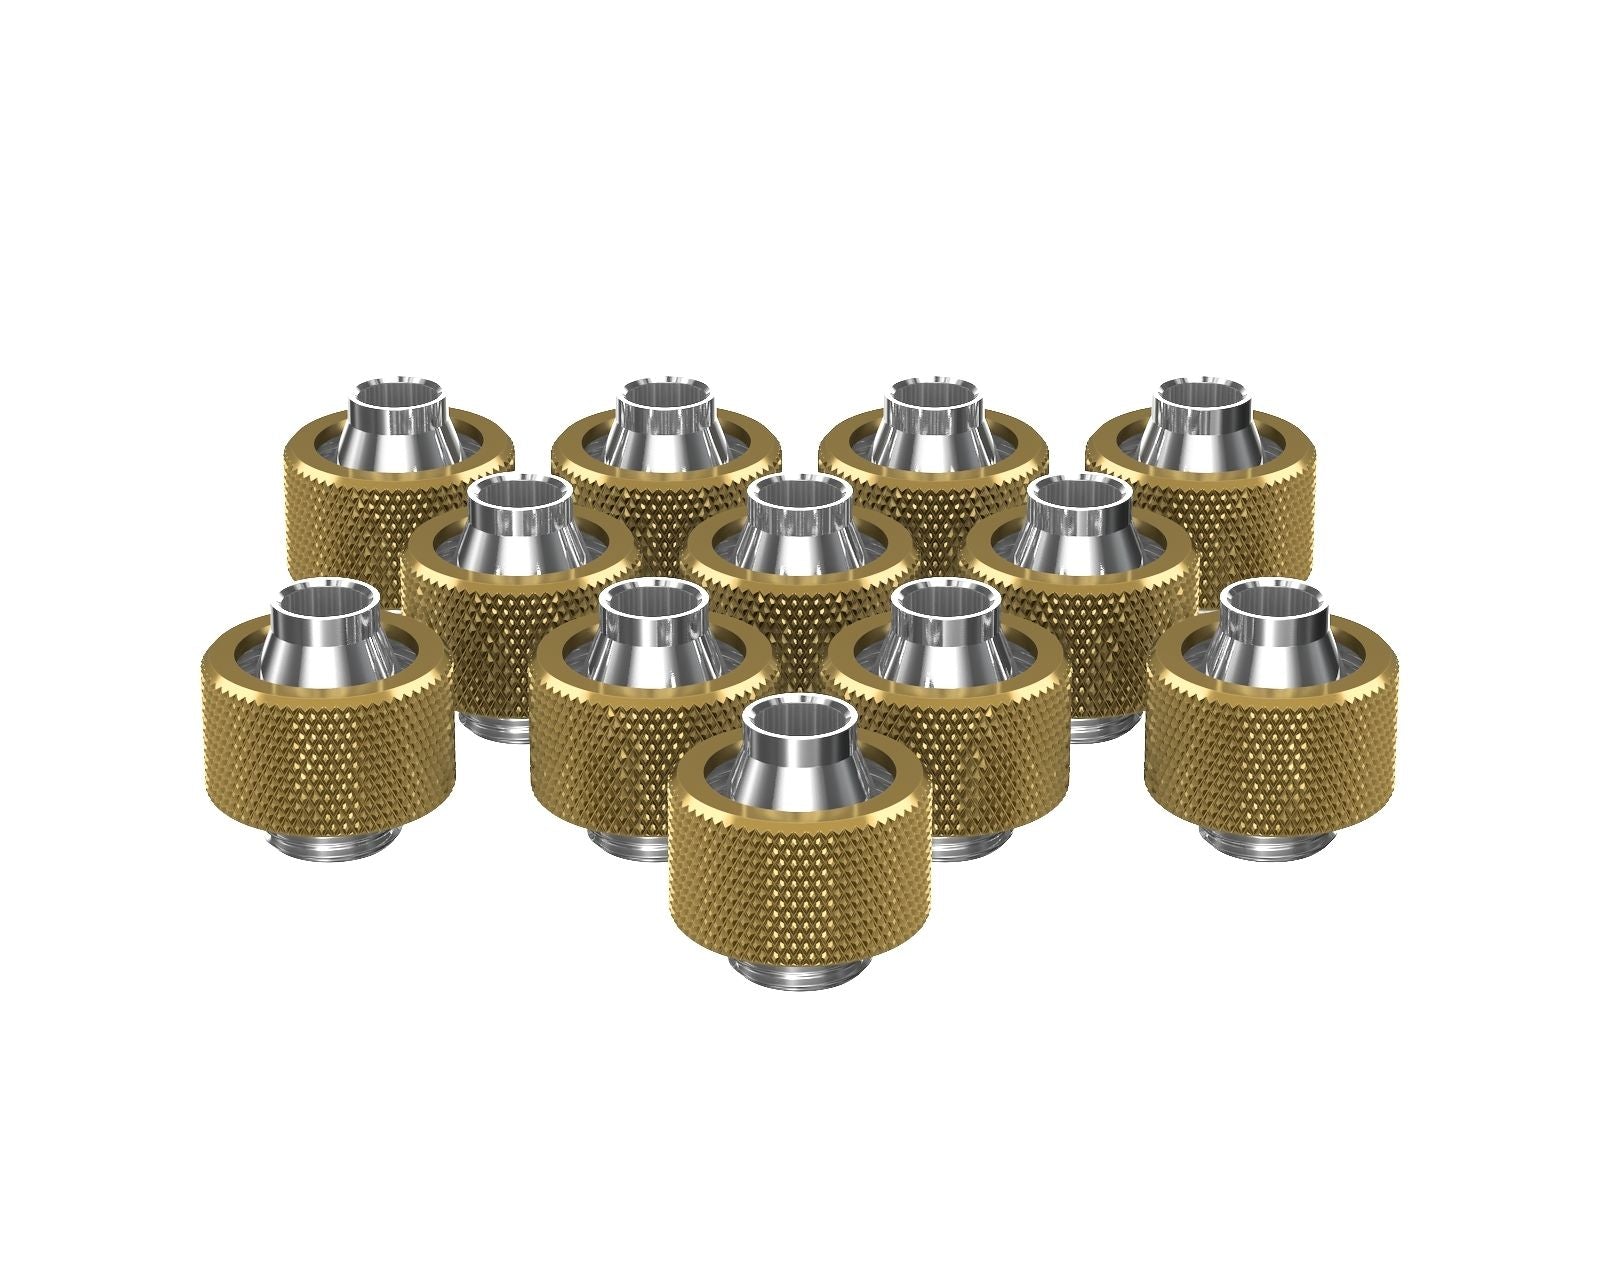 PrimoChill SecureFit SX - Premium Compression Fitting For 3/8in ID x 5/8in OD Flexible Tubing 12 Pack (F-SFSX58-12) - Available in 20+ Colors, Custom Watercooling Loop Ready - Candy Gold